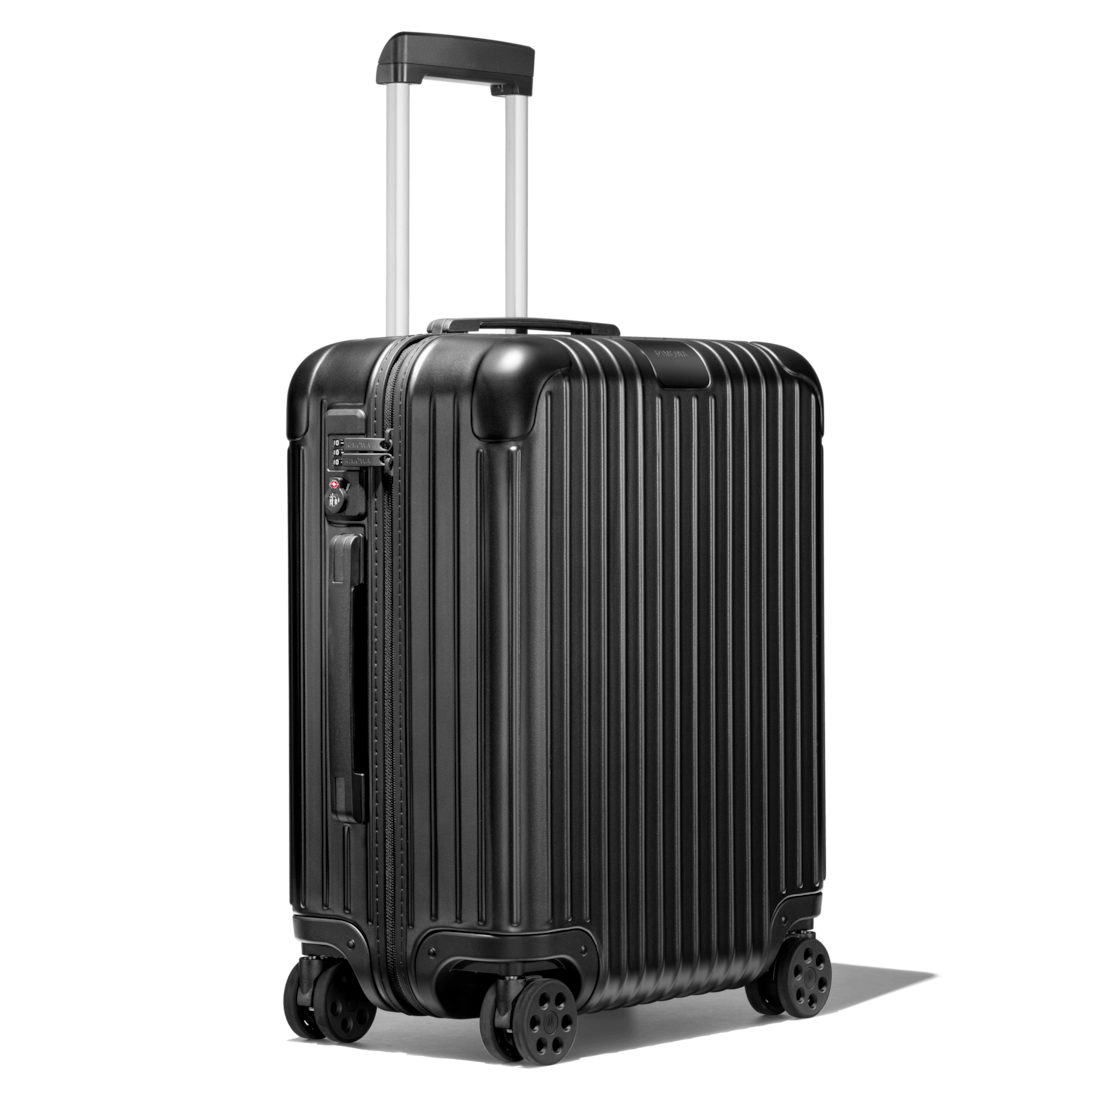 Rimowa Cabin Plus Carry-On - Is the Upgrade Worth It? - Luggage Unpacked